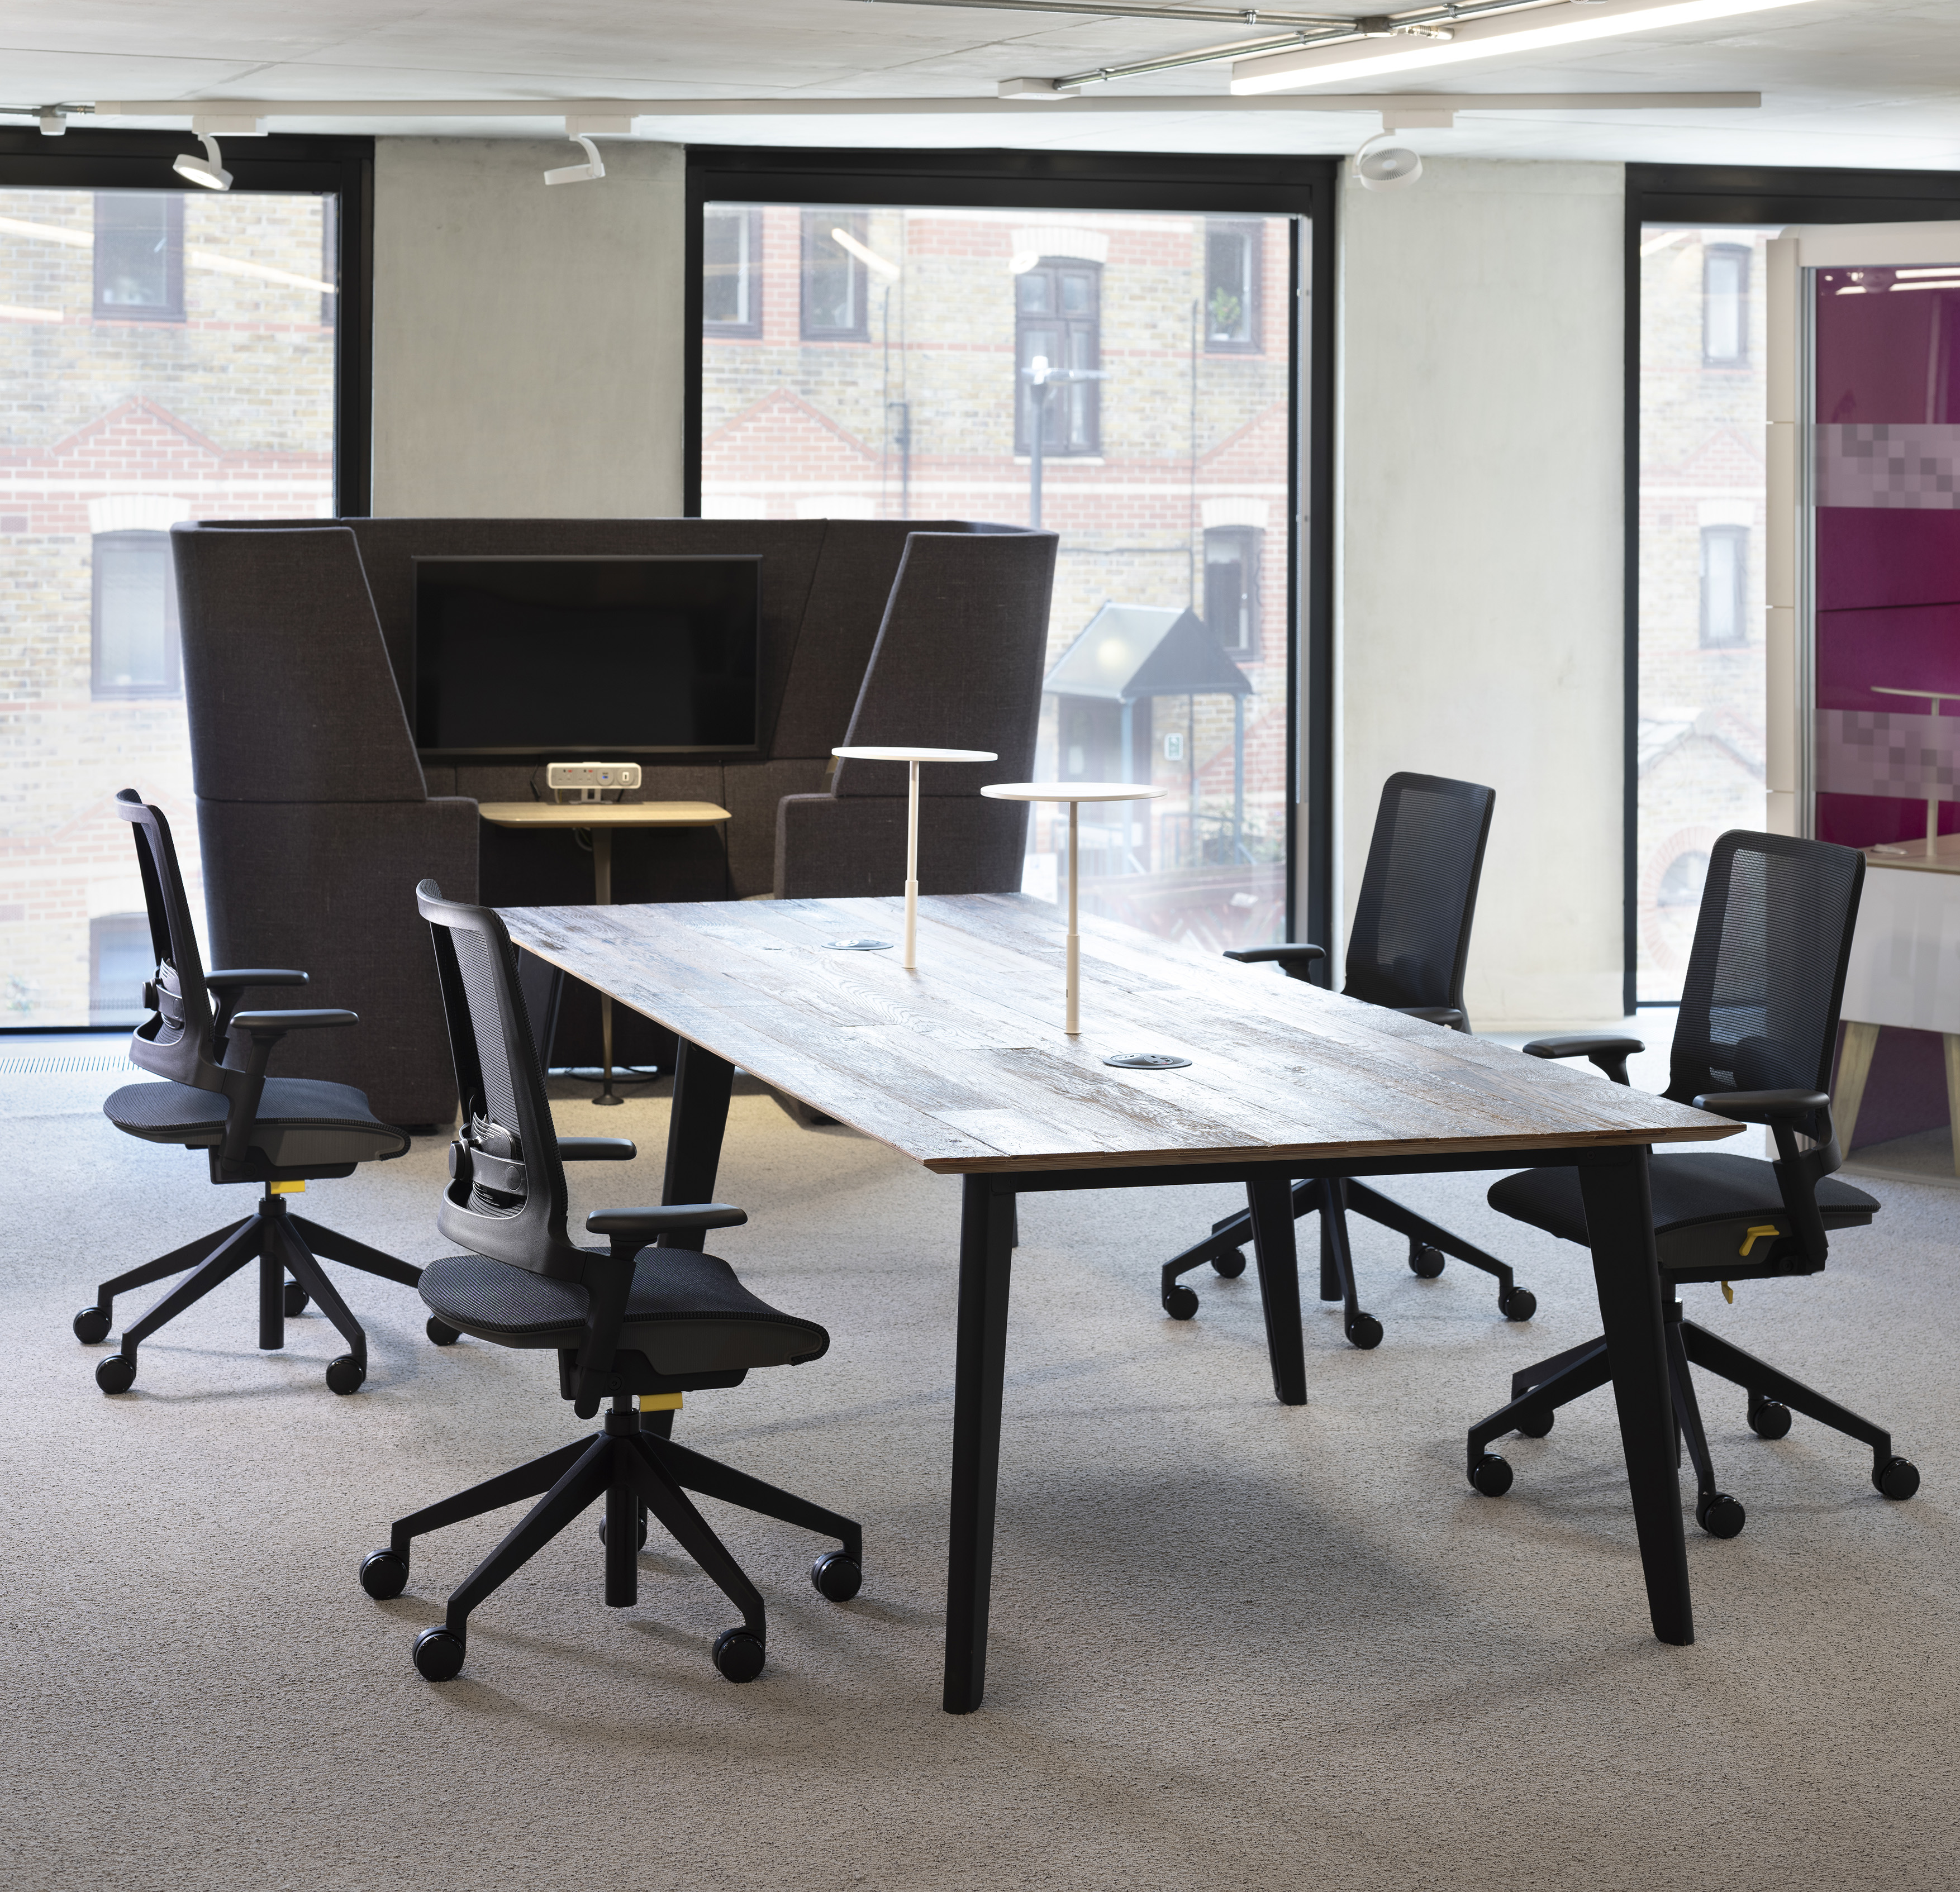 Black office chairs positioned around a brown meeting table